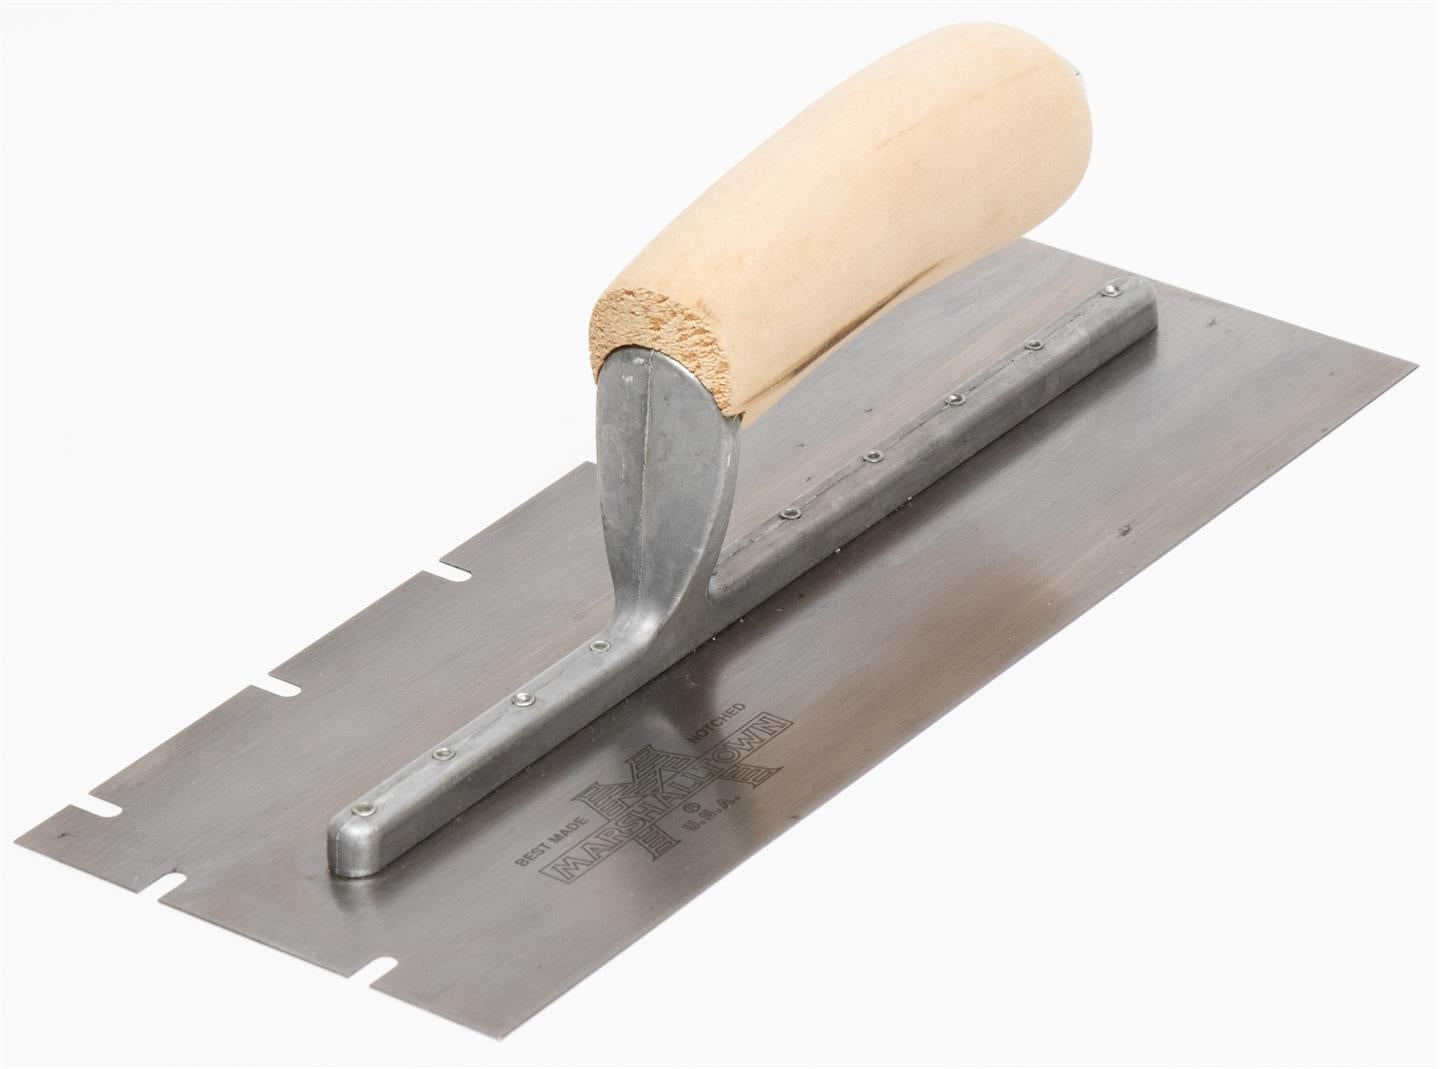 Marshalltown 10711 11 X 4 1-2 Stainless Steel Notched Trowel;3-16 X 3-8 X 1 3-4 Wood Handle